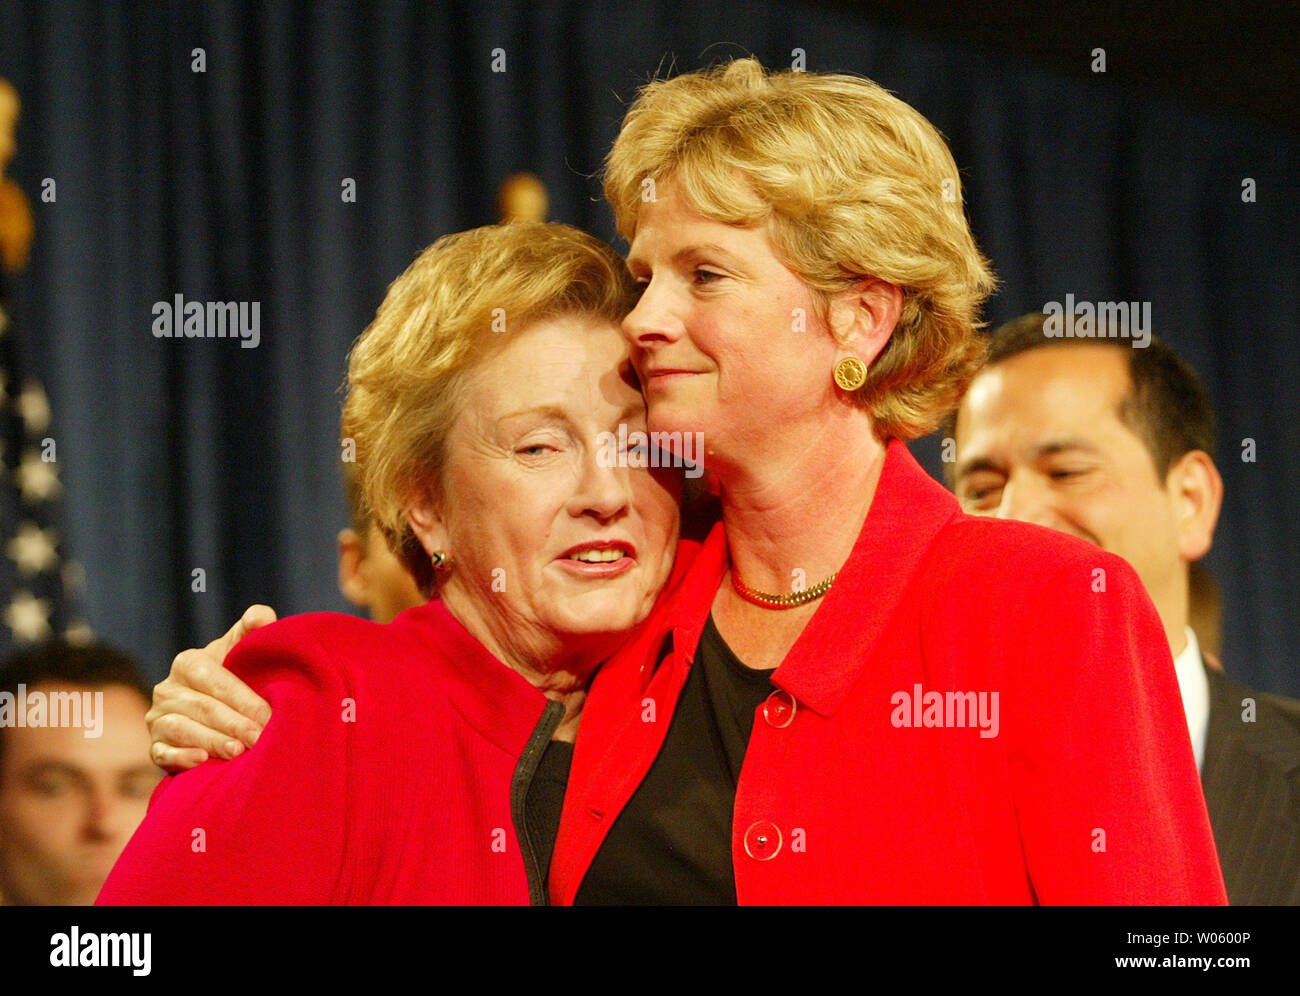 Robin Carnahan (R) gives her mother former Sen. Jean Carnahan a hug after  winning the position of Missouri Secretary of State at the Renaissance  Hotel in St. Louis on Election Night 2004